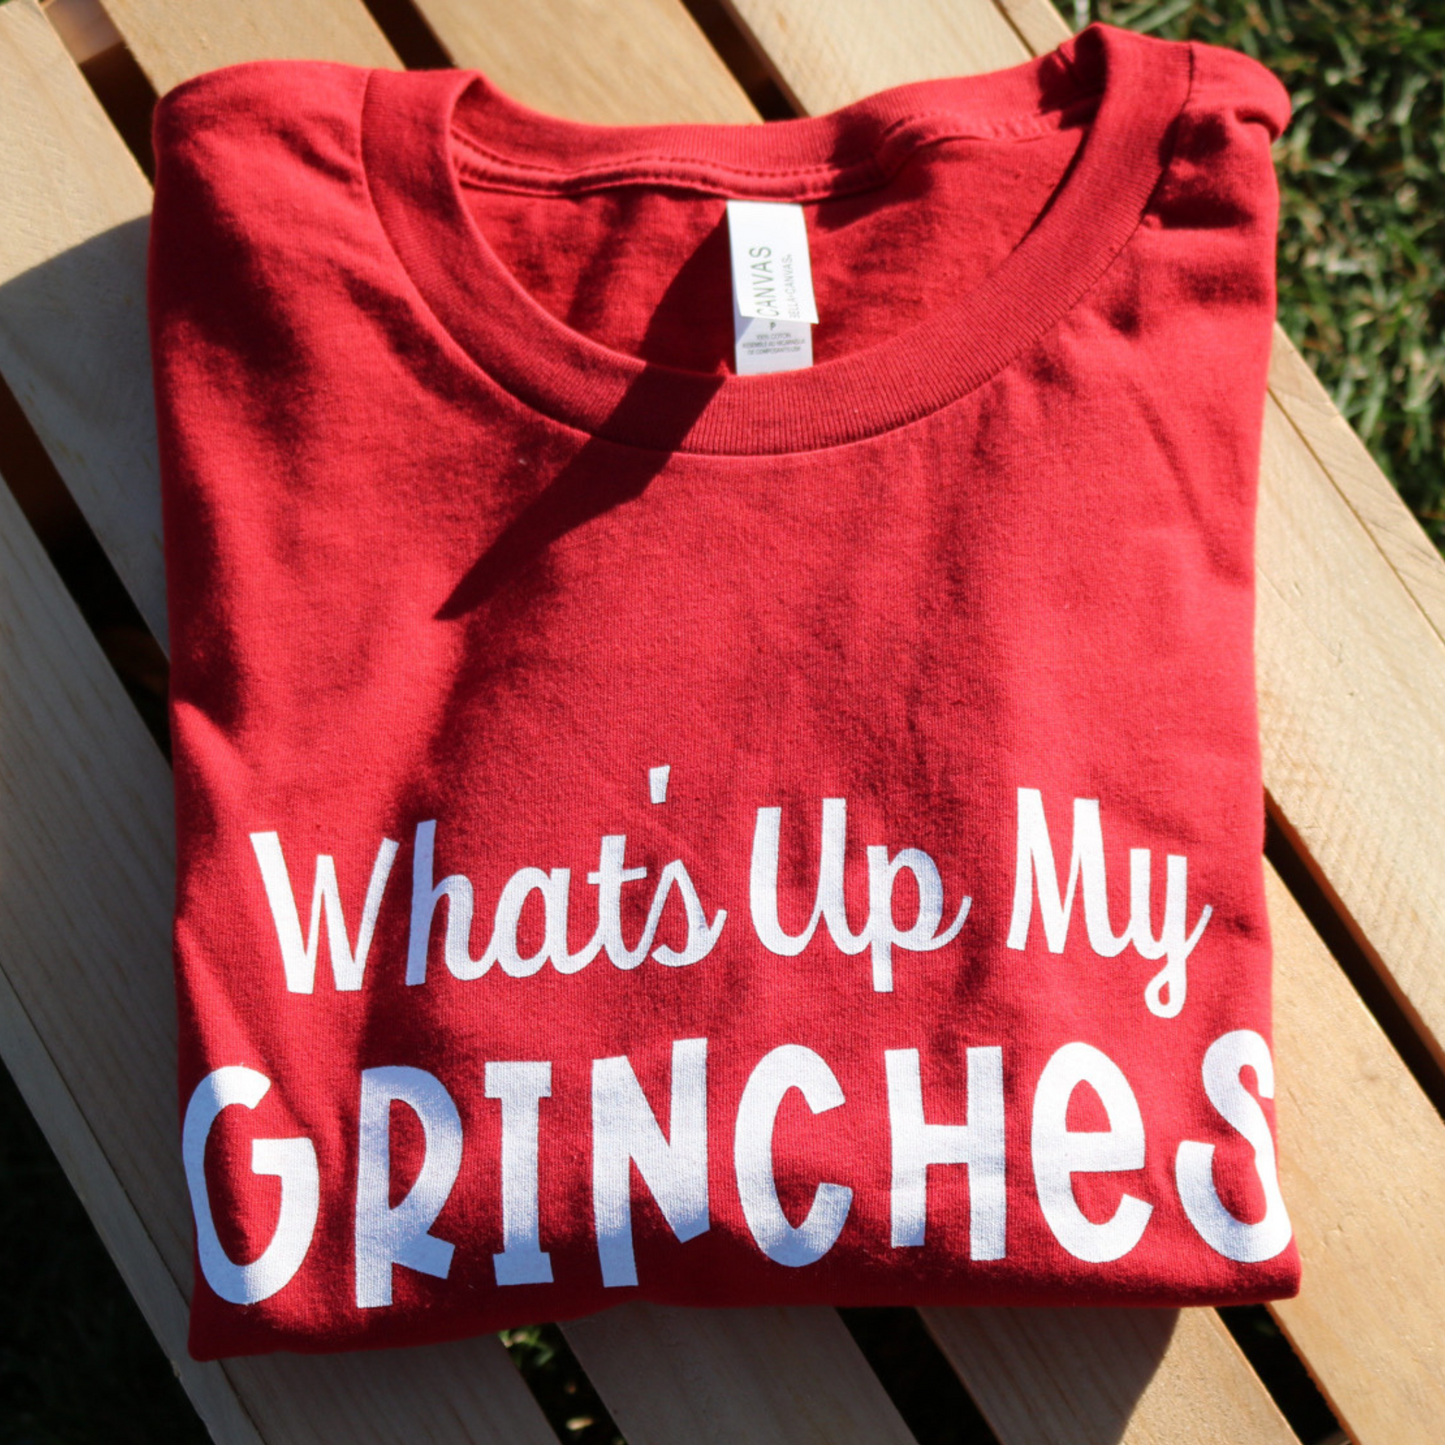 What's Up My Grinches? - T-Shirt - folded front view - stylized on a wooden crate in a grassy area.